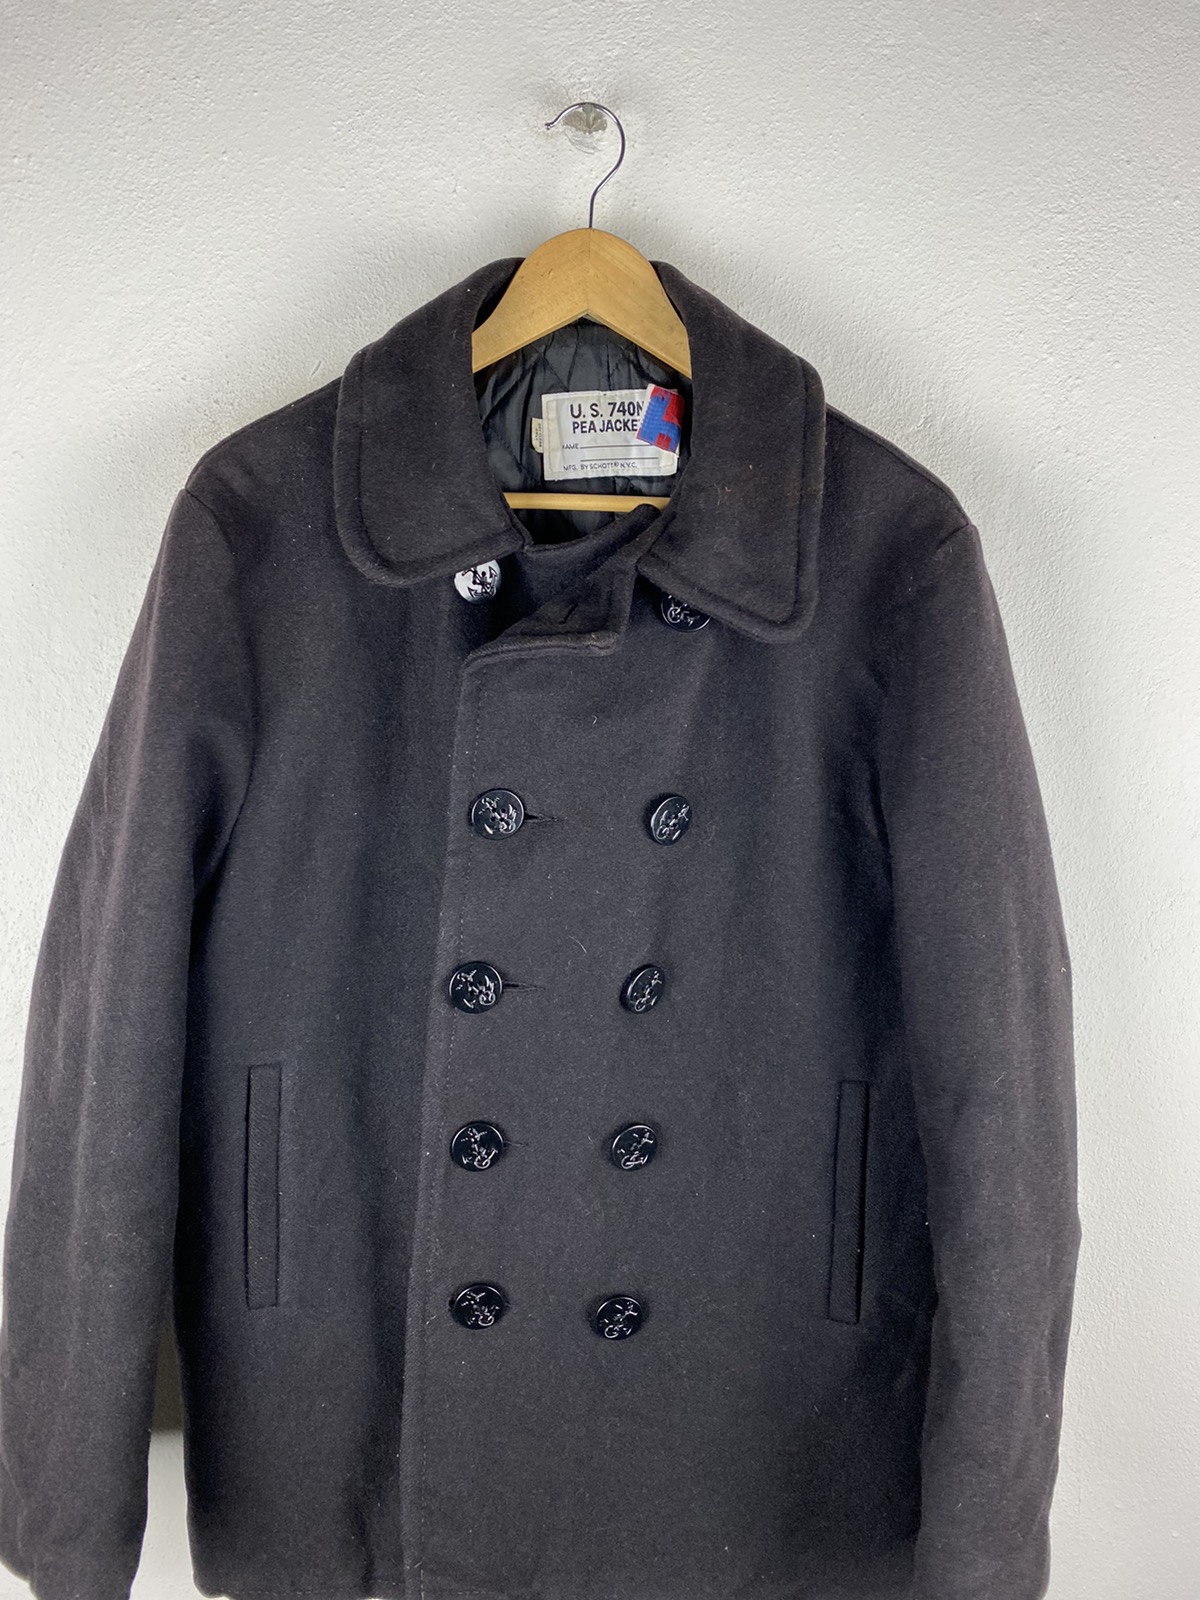 🔥SALE🔥aU.S 740N PEA JACKET BY SCHOTT MADE IN USA - 3